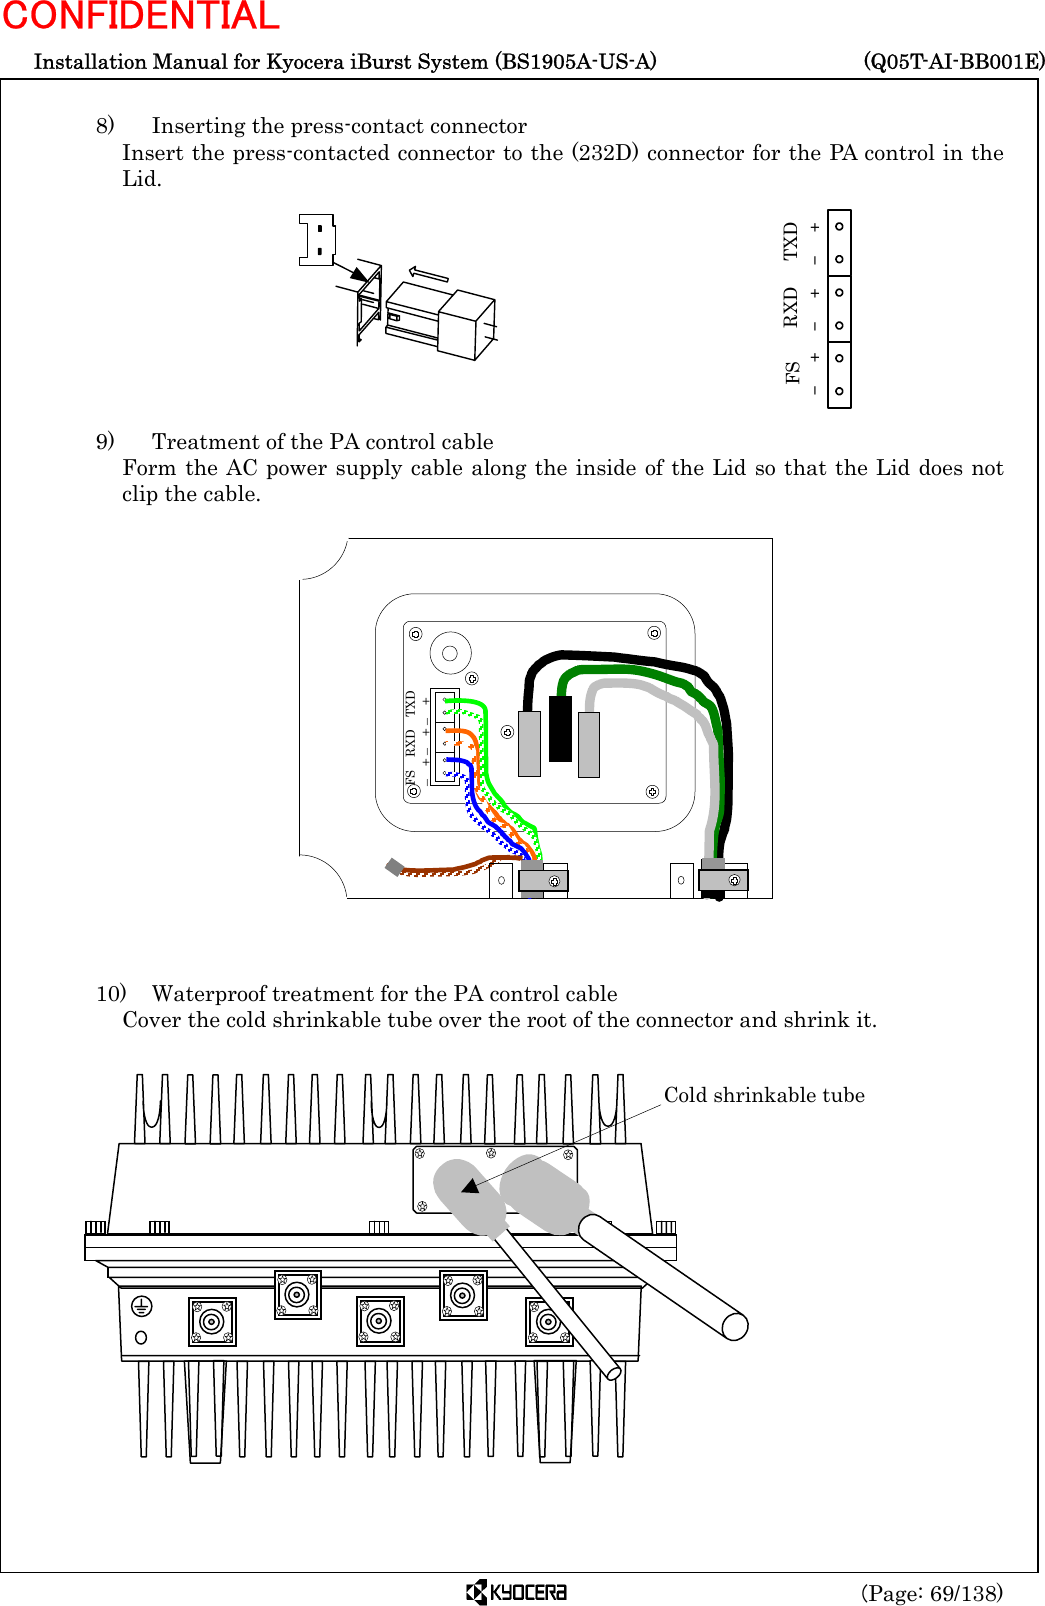  Installation Manual for Kyocera iBurst System (BS1905A-US-A)     (Q05T-AI-BB001E) (Page: 69/138) CONFIDENTIAL  8)    Inserting the press-contact connector Insert the press-contacted connector to the (232D) connector for the PA control in the Lid.          9)    Treatment of the PA control cable Form the AC power supply cable along the inside of the Lid so that the Lid does not clip the cable.                   10)    Waterproof treatment for the PA control cable Cover the cold shrinkable tube over the root of the connector and shrink it.                +-FS RXD TXD+-+-     Cold shrinkable tube FS  RXD  TXD –  + –  + –  + 